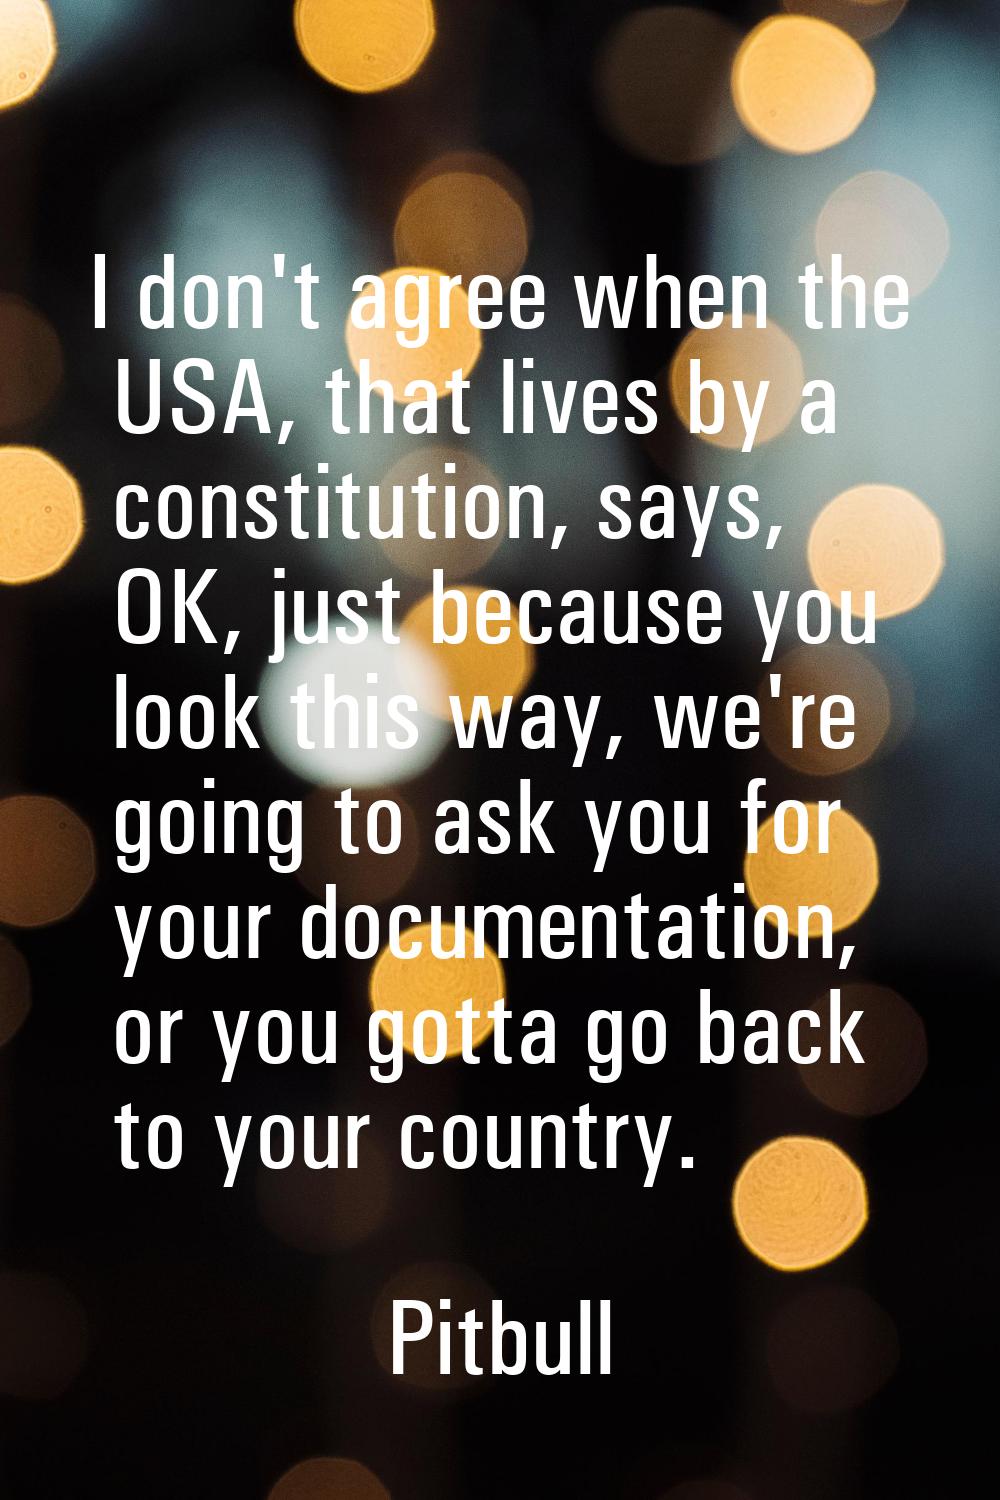 I don't agree when the USA, that lives by a constitution, says, OK, just because you look this way,